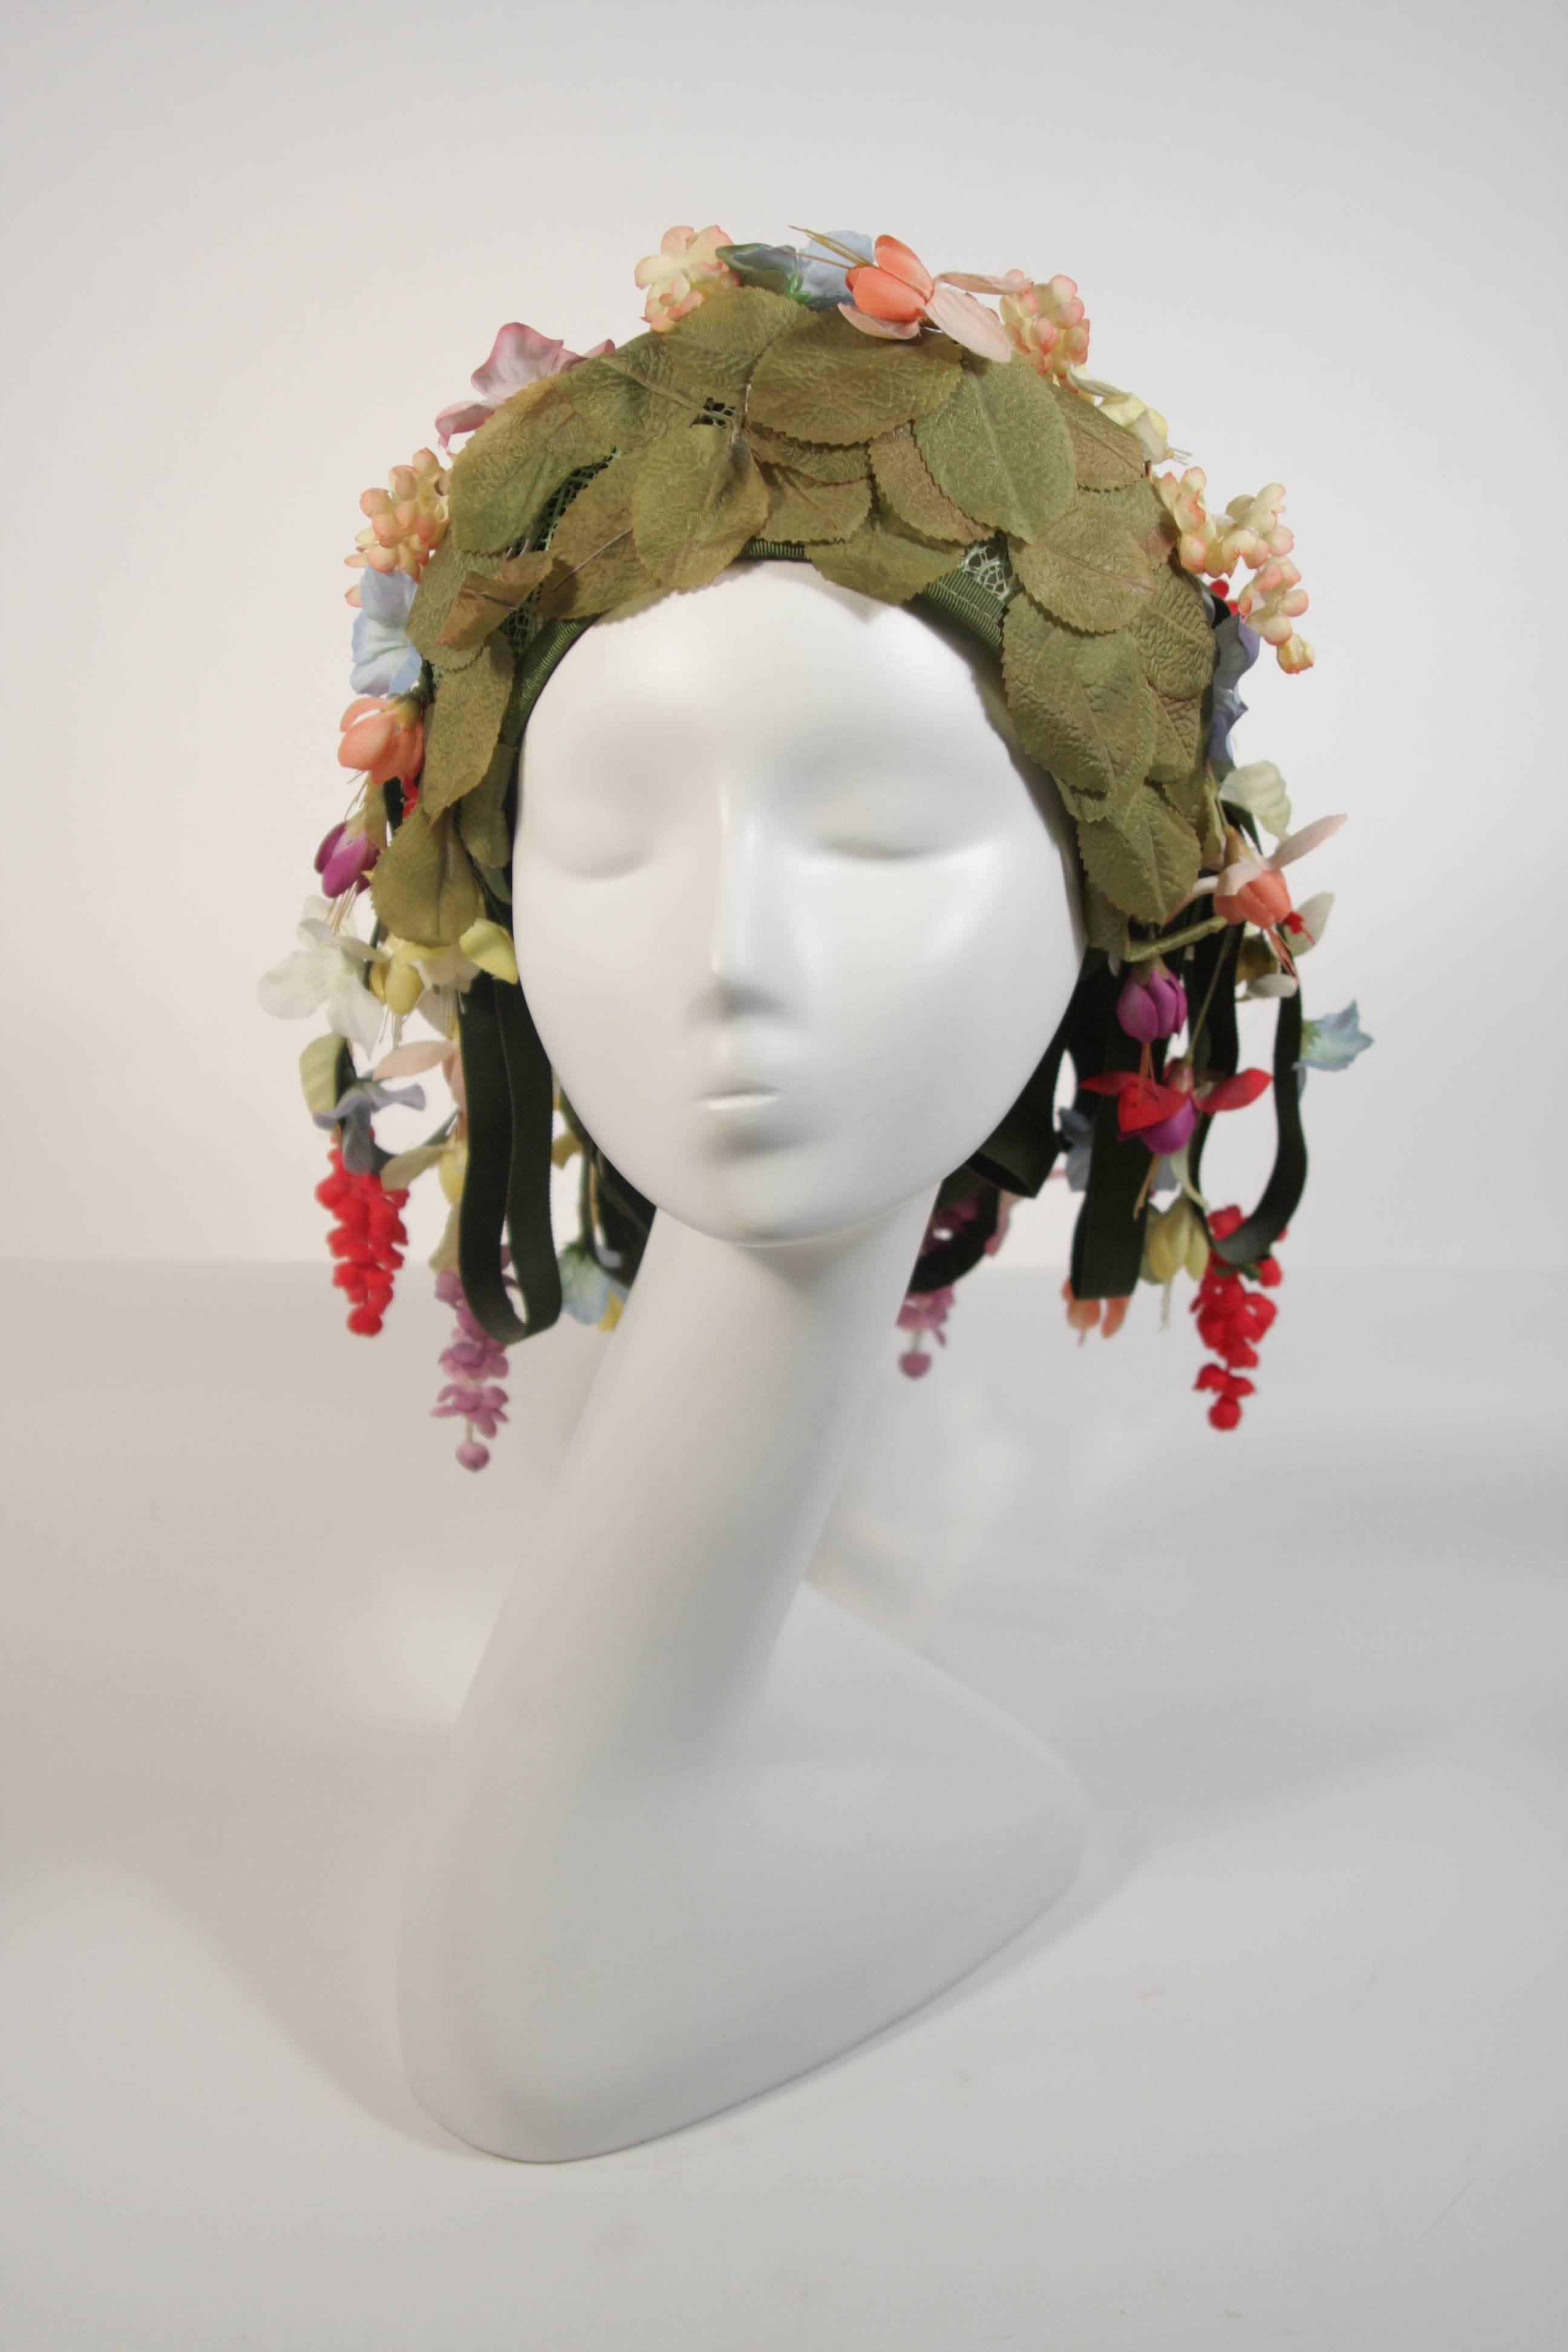 This Jack McConnell hat is composed of a green mesh foundation and features cascading green ribbons with wonderful flowers. A beautiful statement piece filled with fantasy. This hat is in great vintage condition.

**Please cross-reference